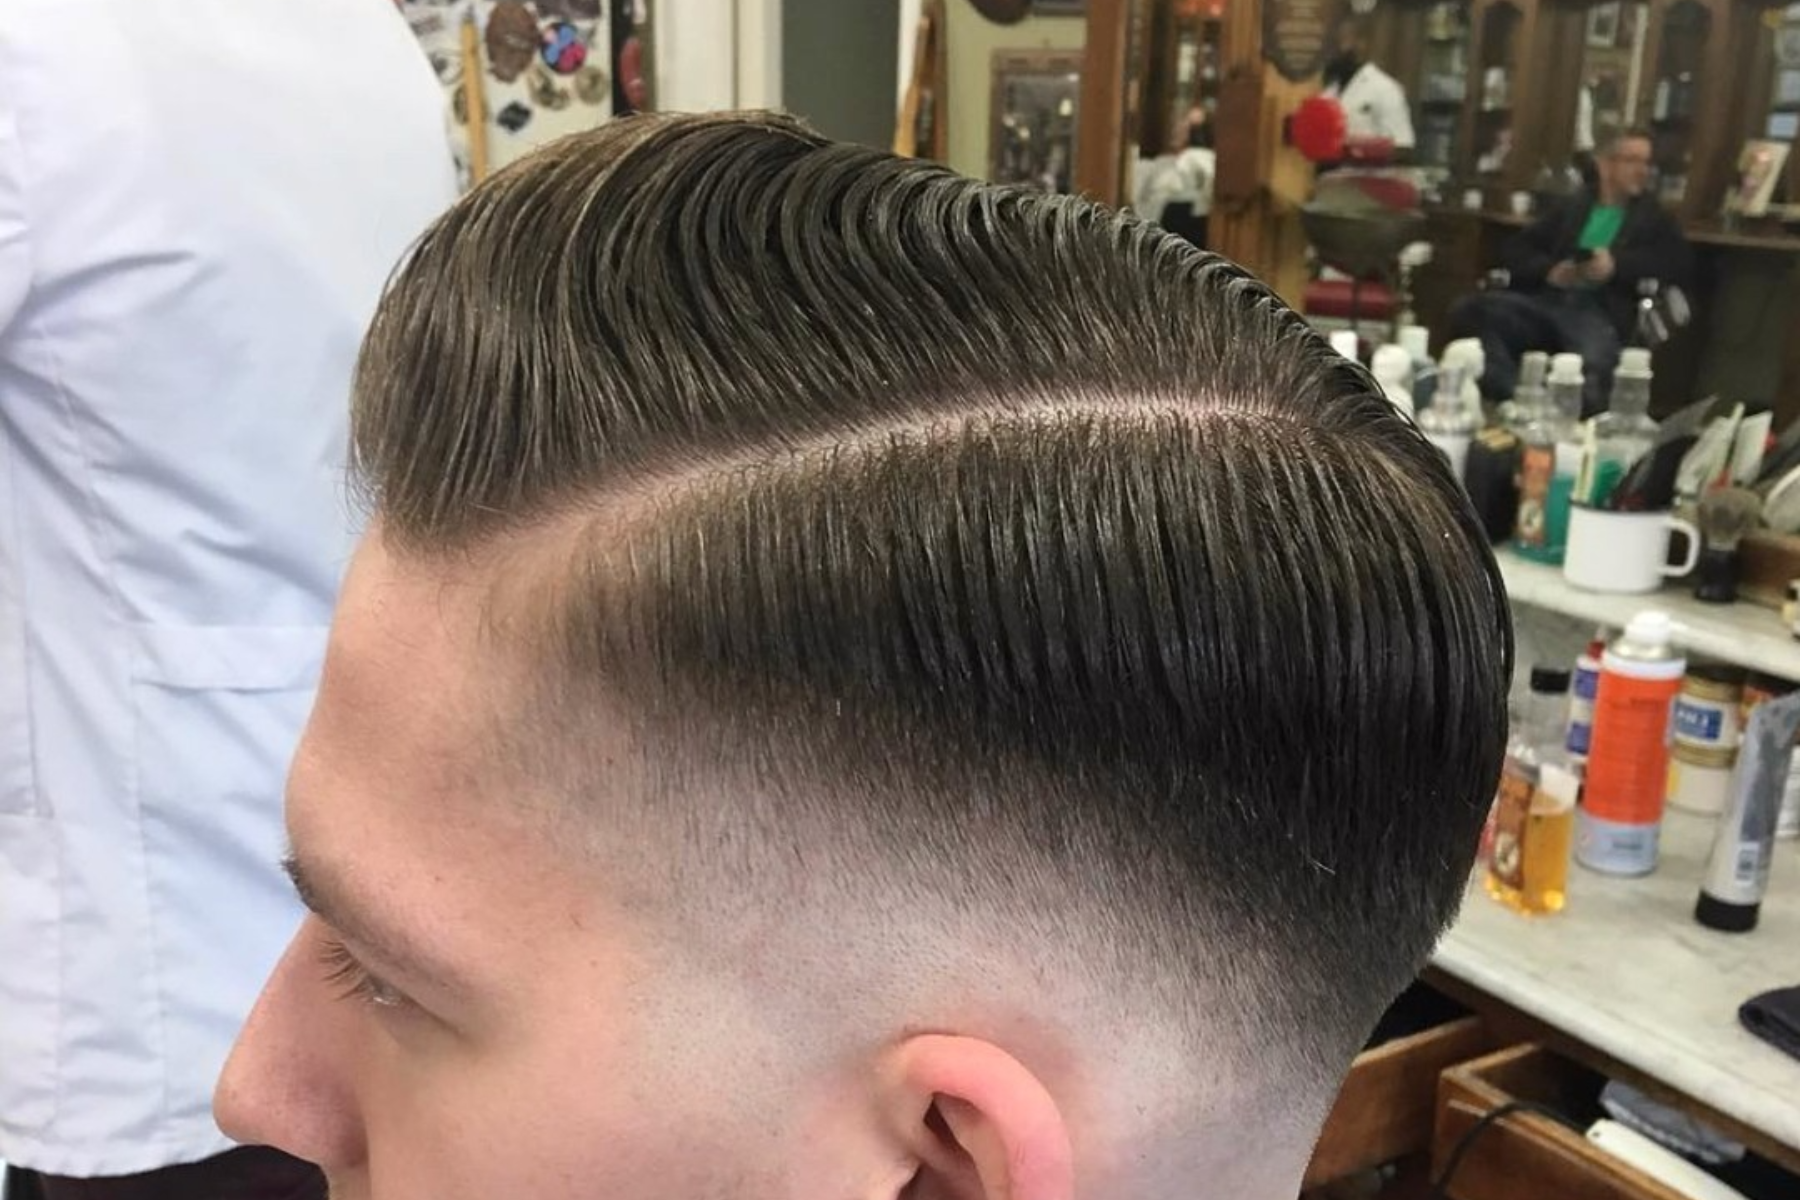 A man with a pompadour haircut is inside a barber shop